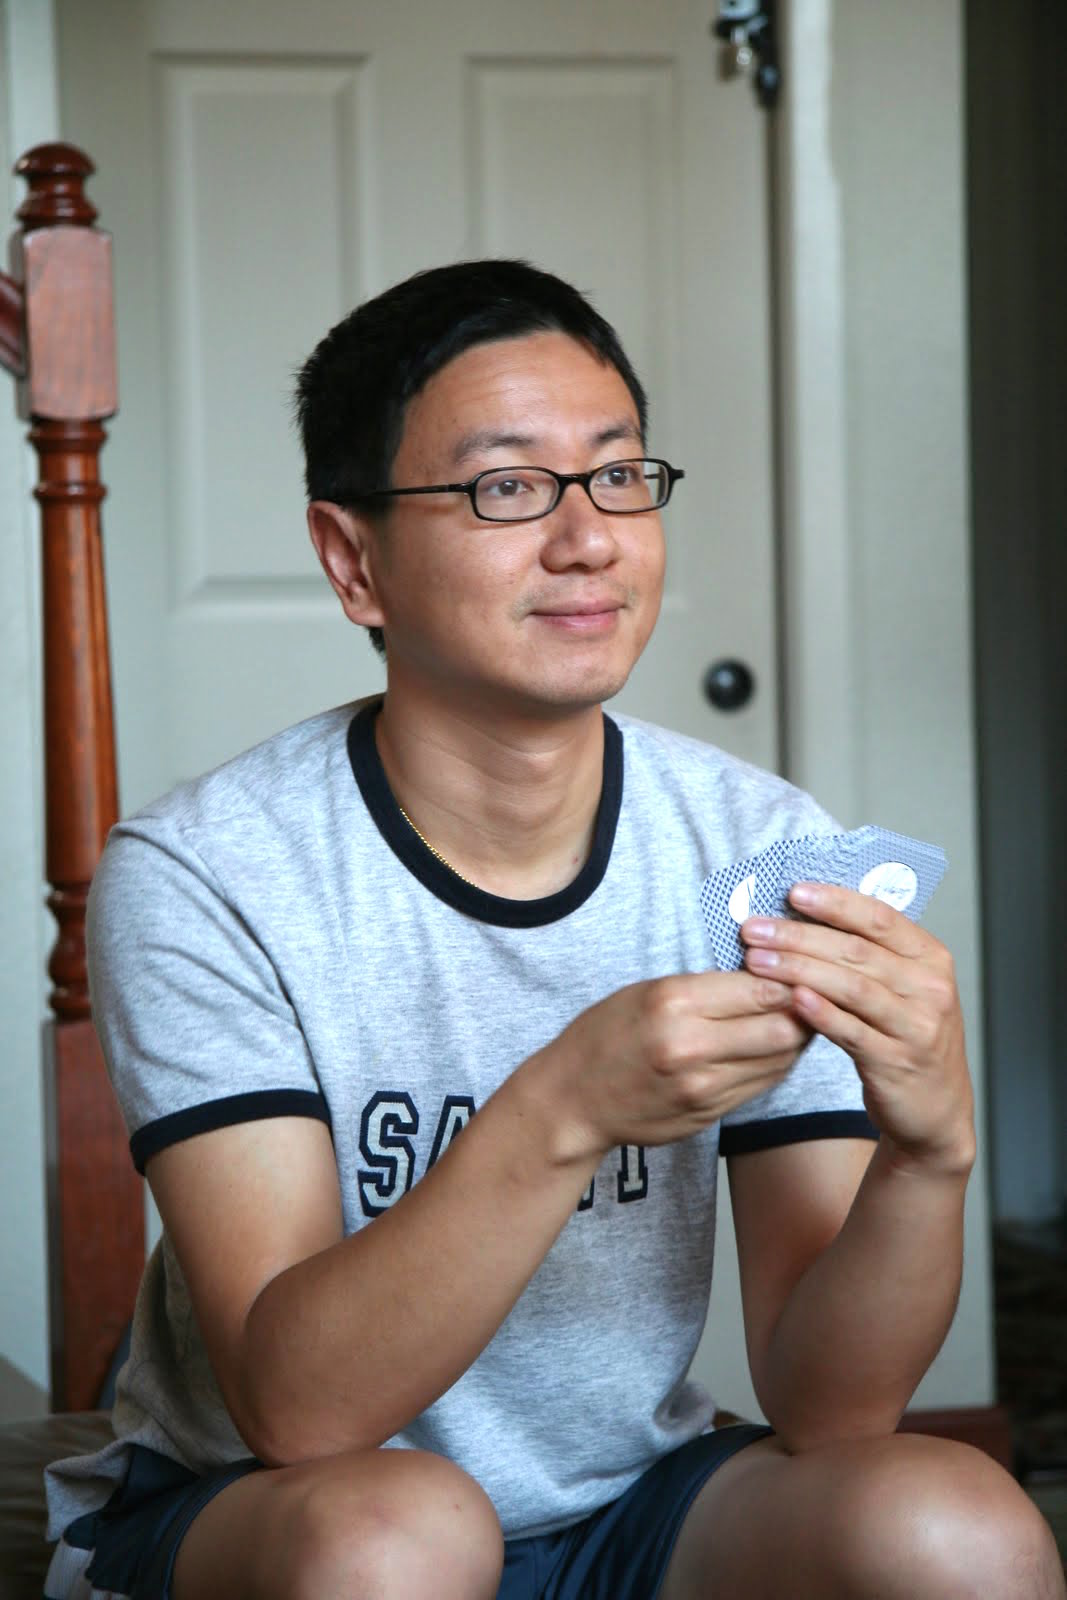 a man is sitting on the floor holding up some cards